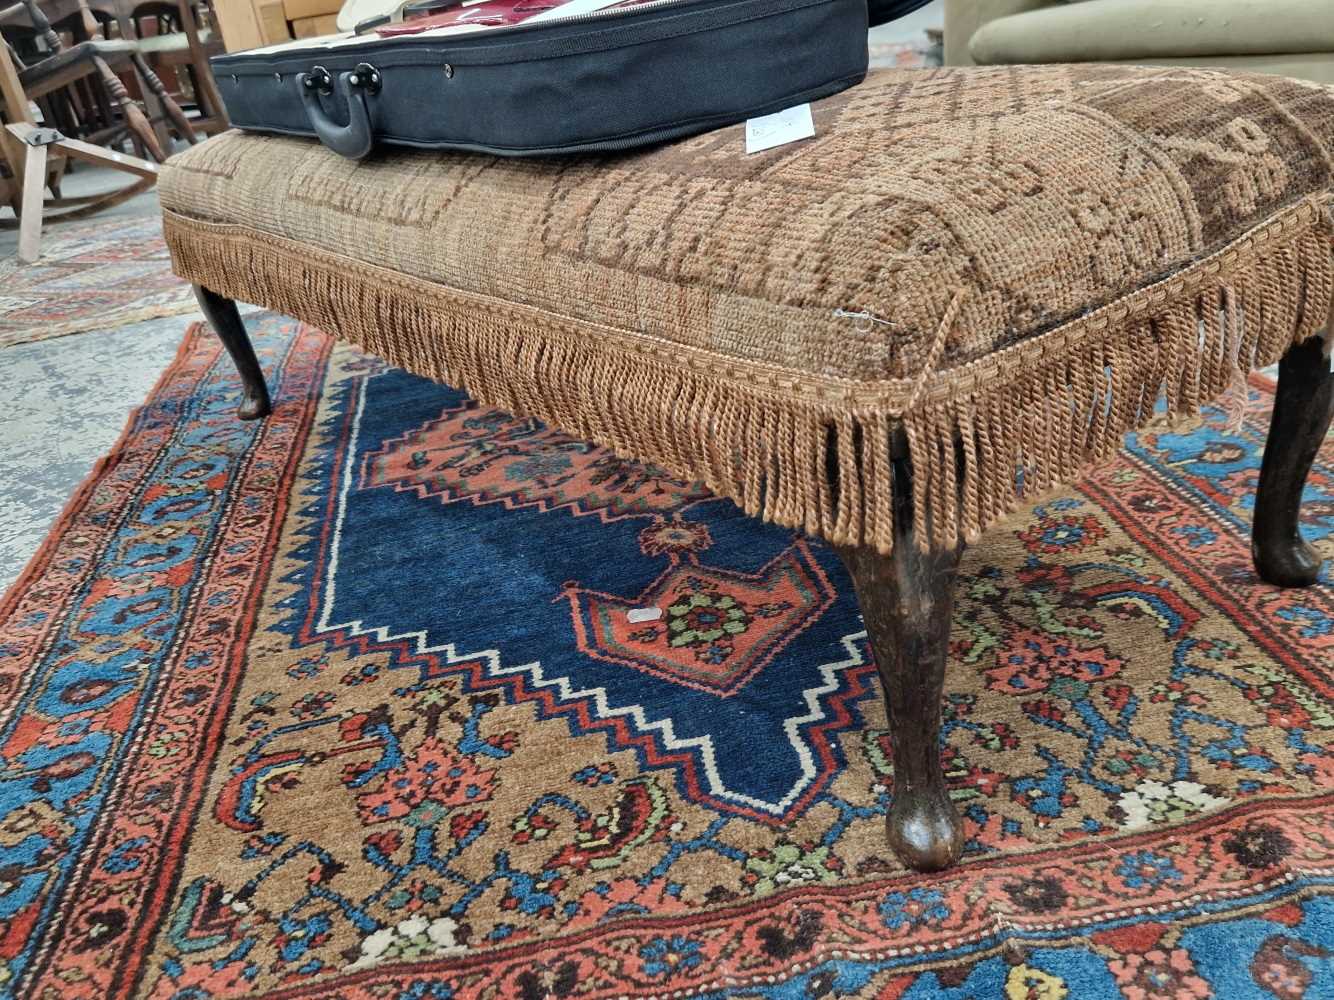 A vintage lonh footstool with carpet upholstery.